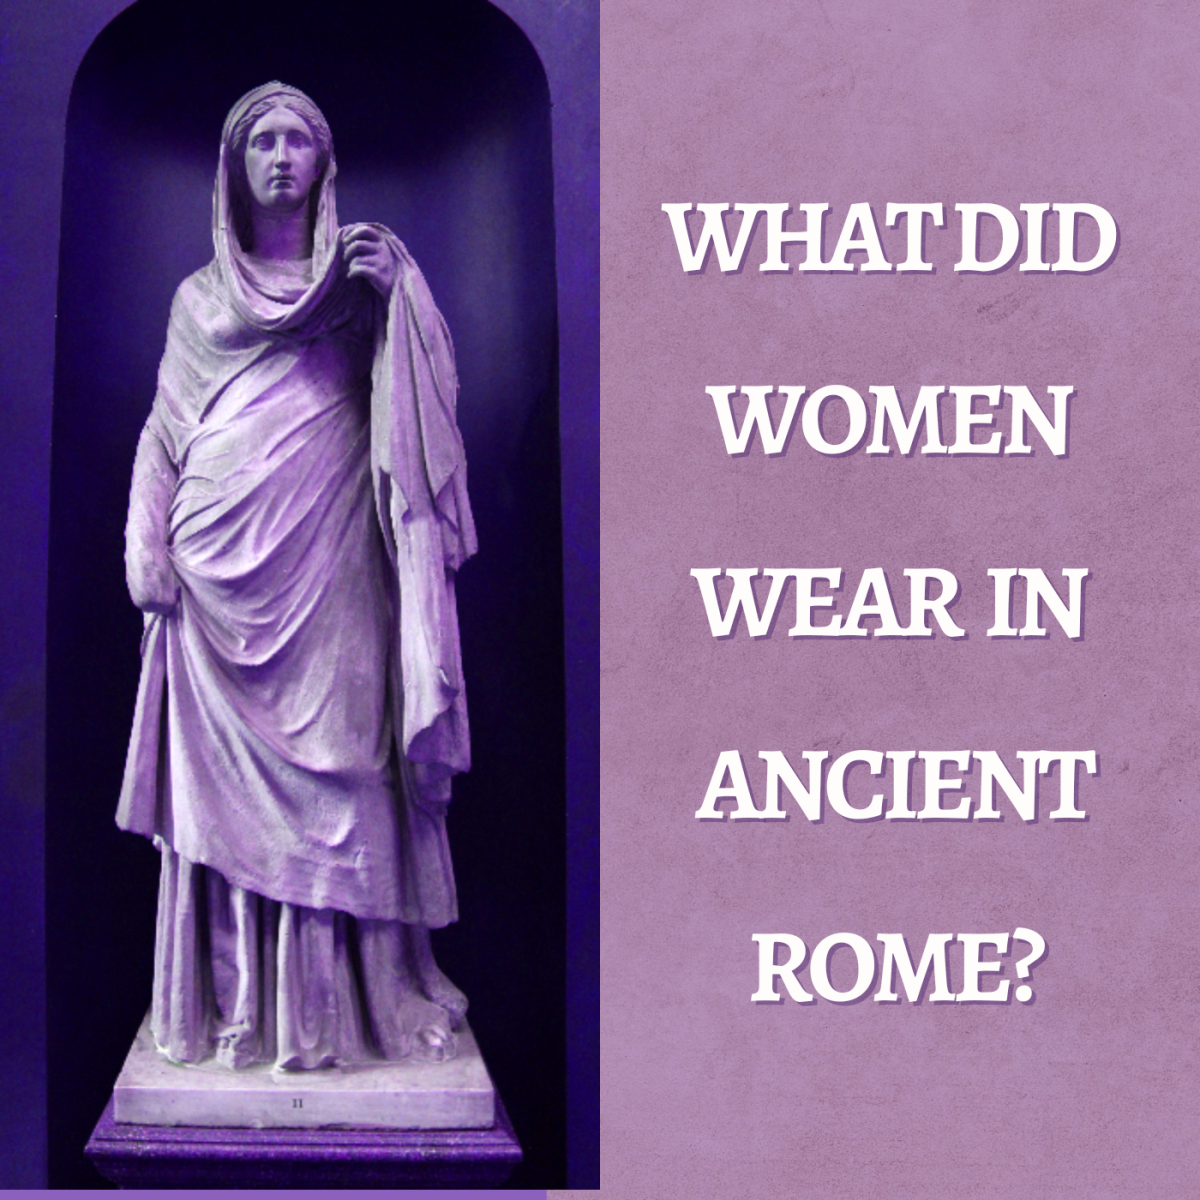 All about the types of clothing worn by women in Ancient Rome.